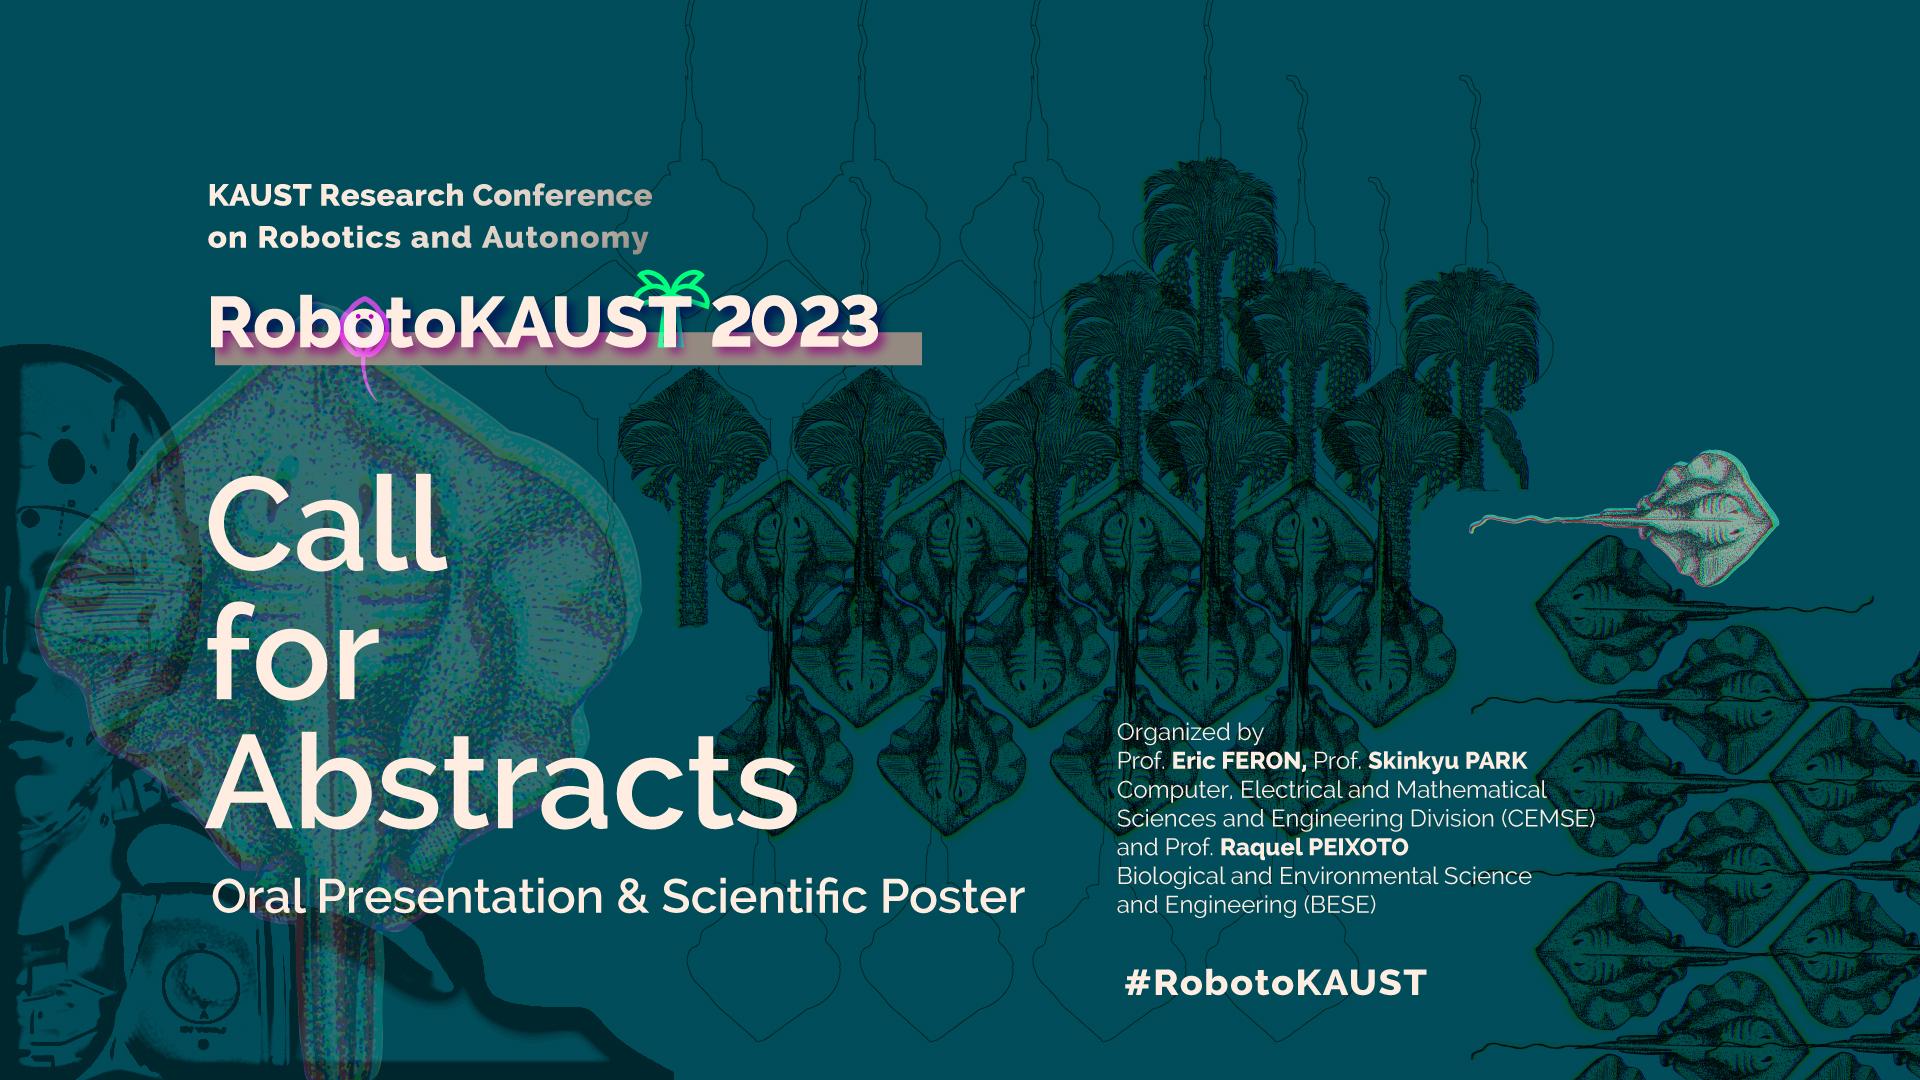 RobotoKAUST 2023 Call for Abstracts